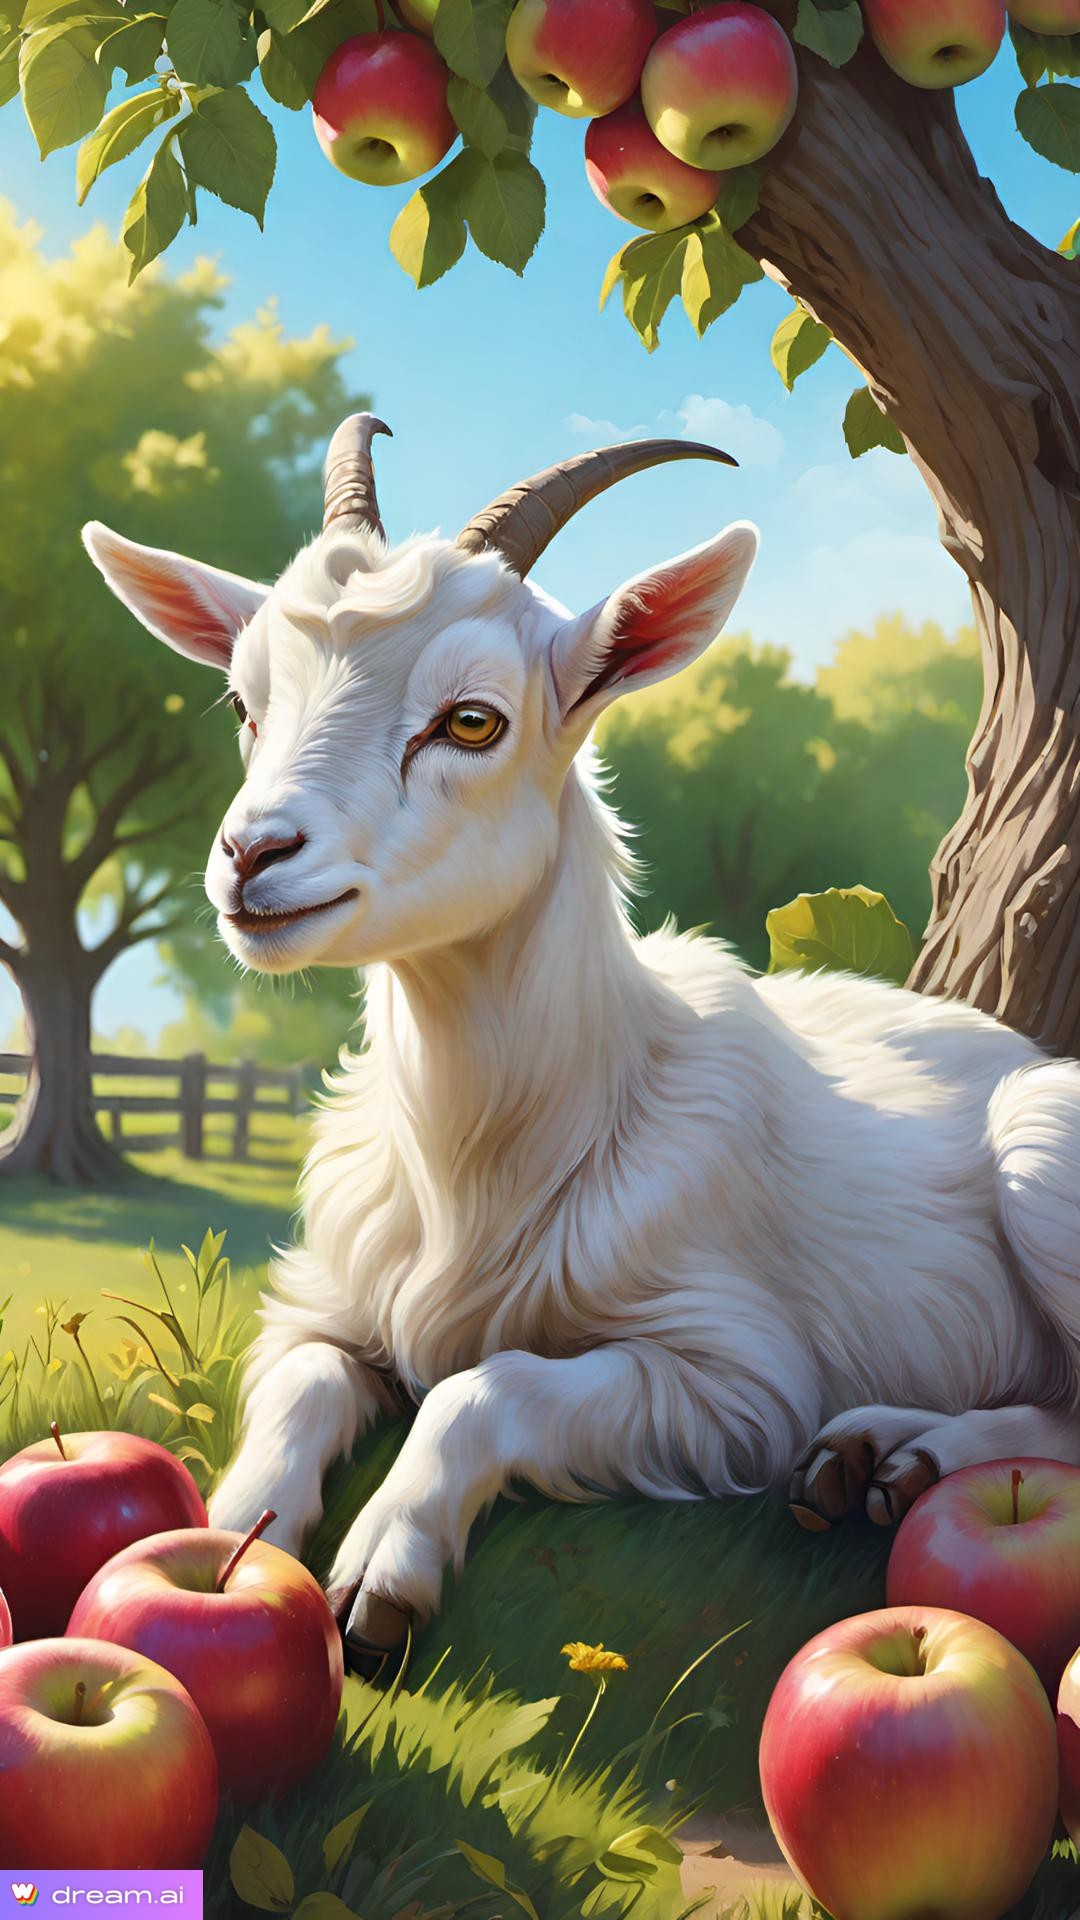 a white goat lying down next to a tree and apples